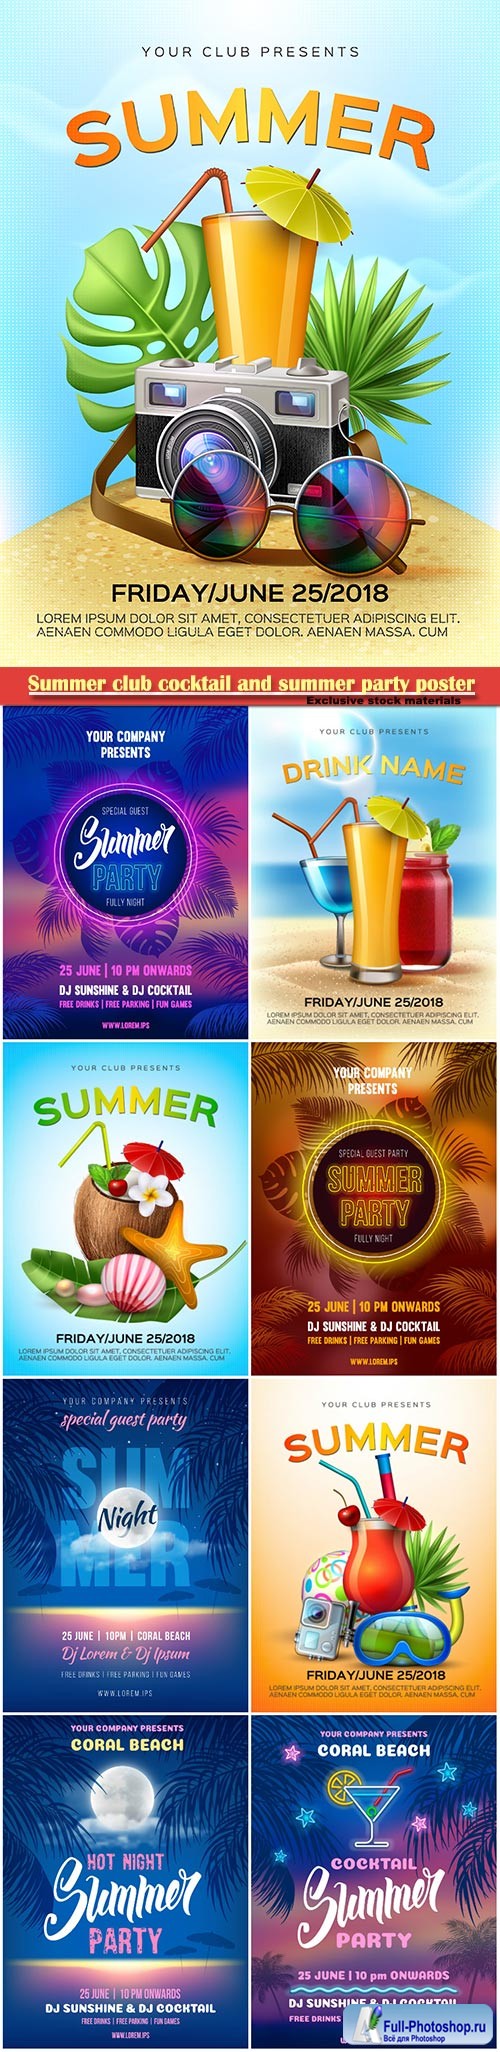 Summer club cocktail and summer night party poster template